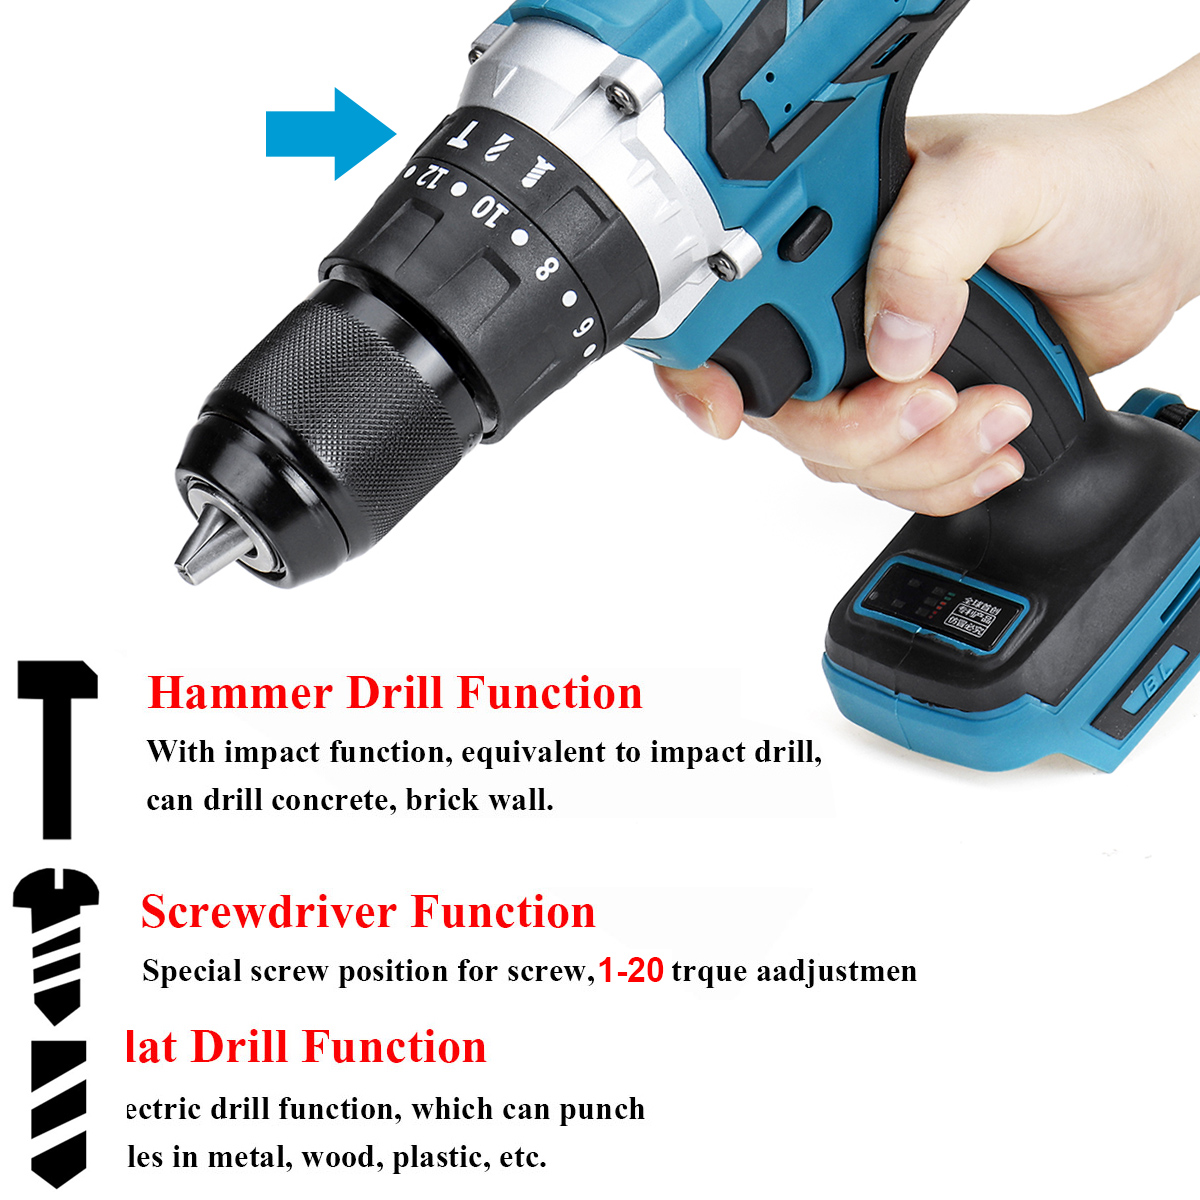 VIOLEWORKS-350Nm-3-In-1-Regulated-Speed-Drill-Brushless-Electric-Impact-Drill-Driver-Hammer-Drill-Fo-1698395-3